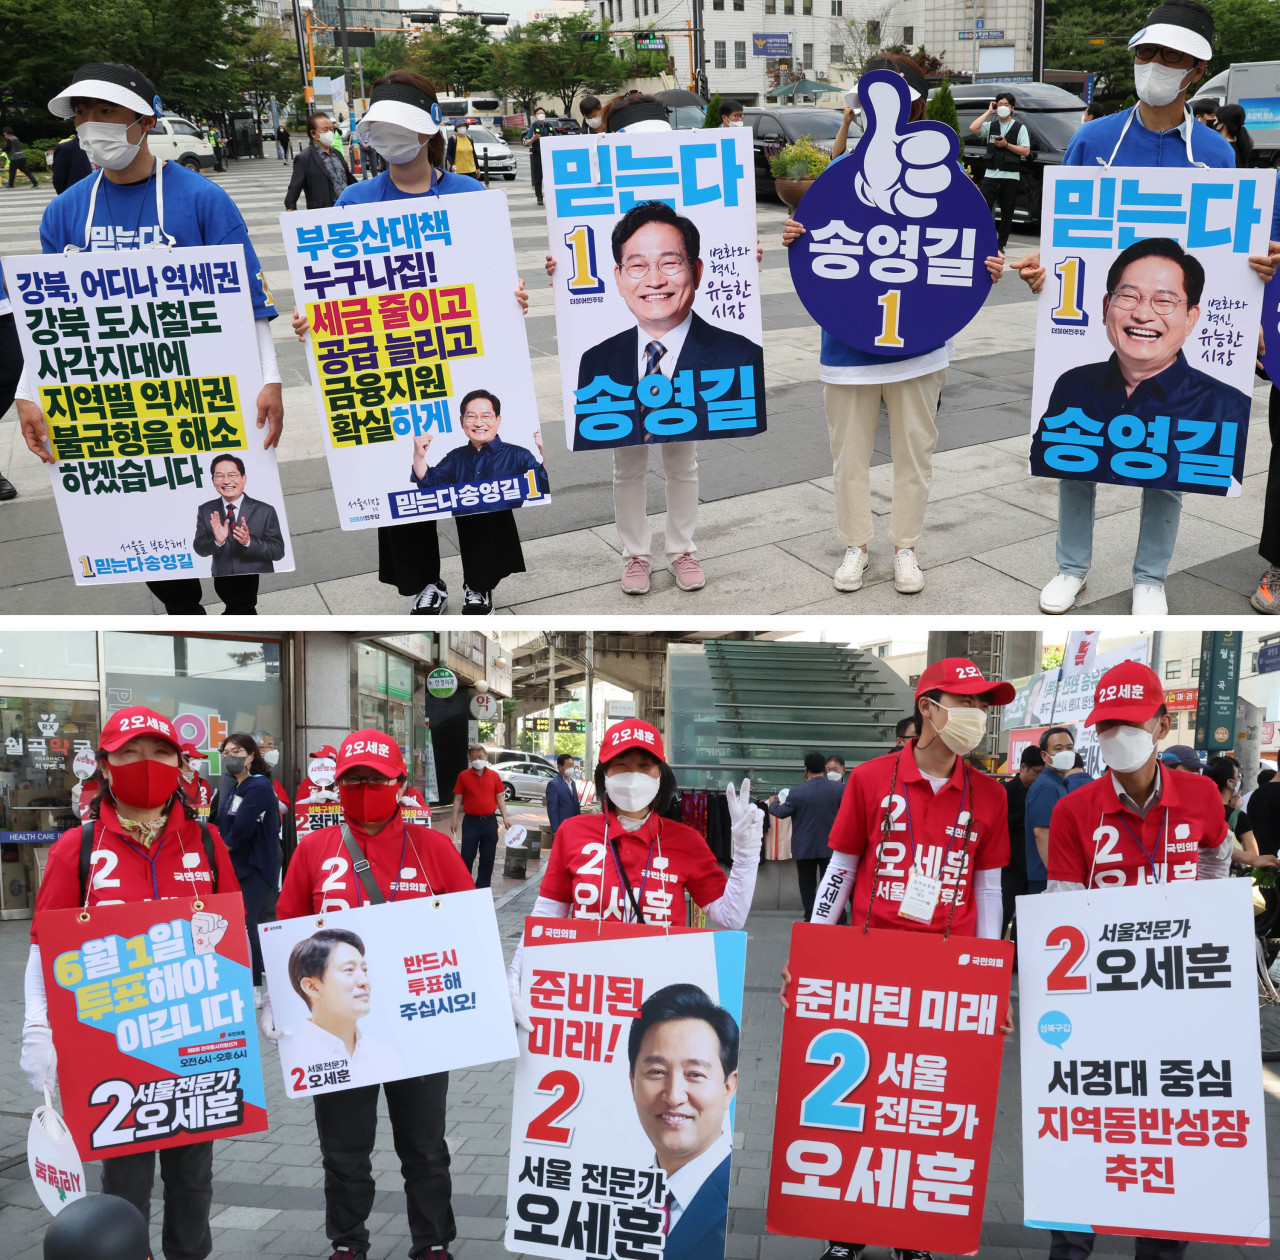 Election canvassers for Seol mayoral candidates are campaigning in the streets of Seongdong District, Seoul. (Yonhap)